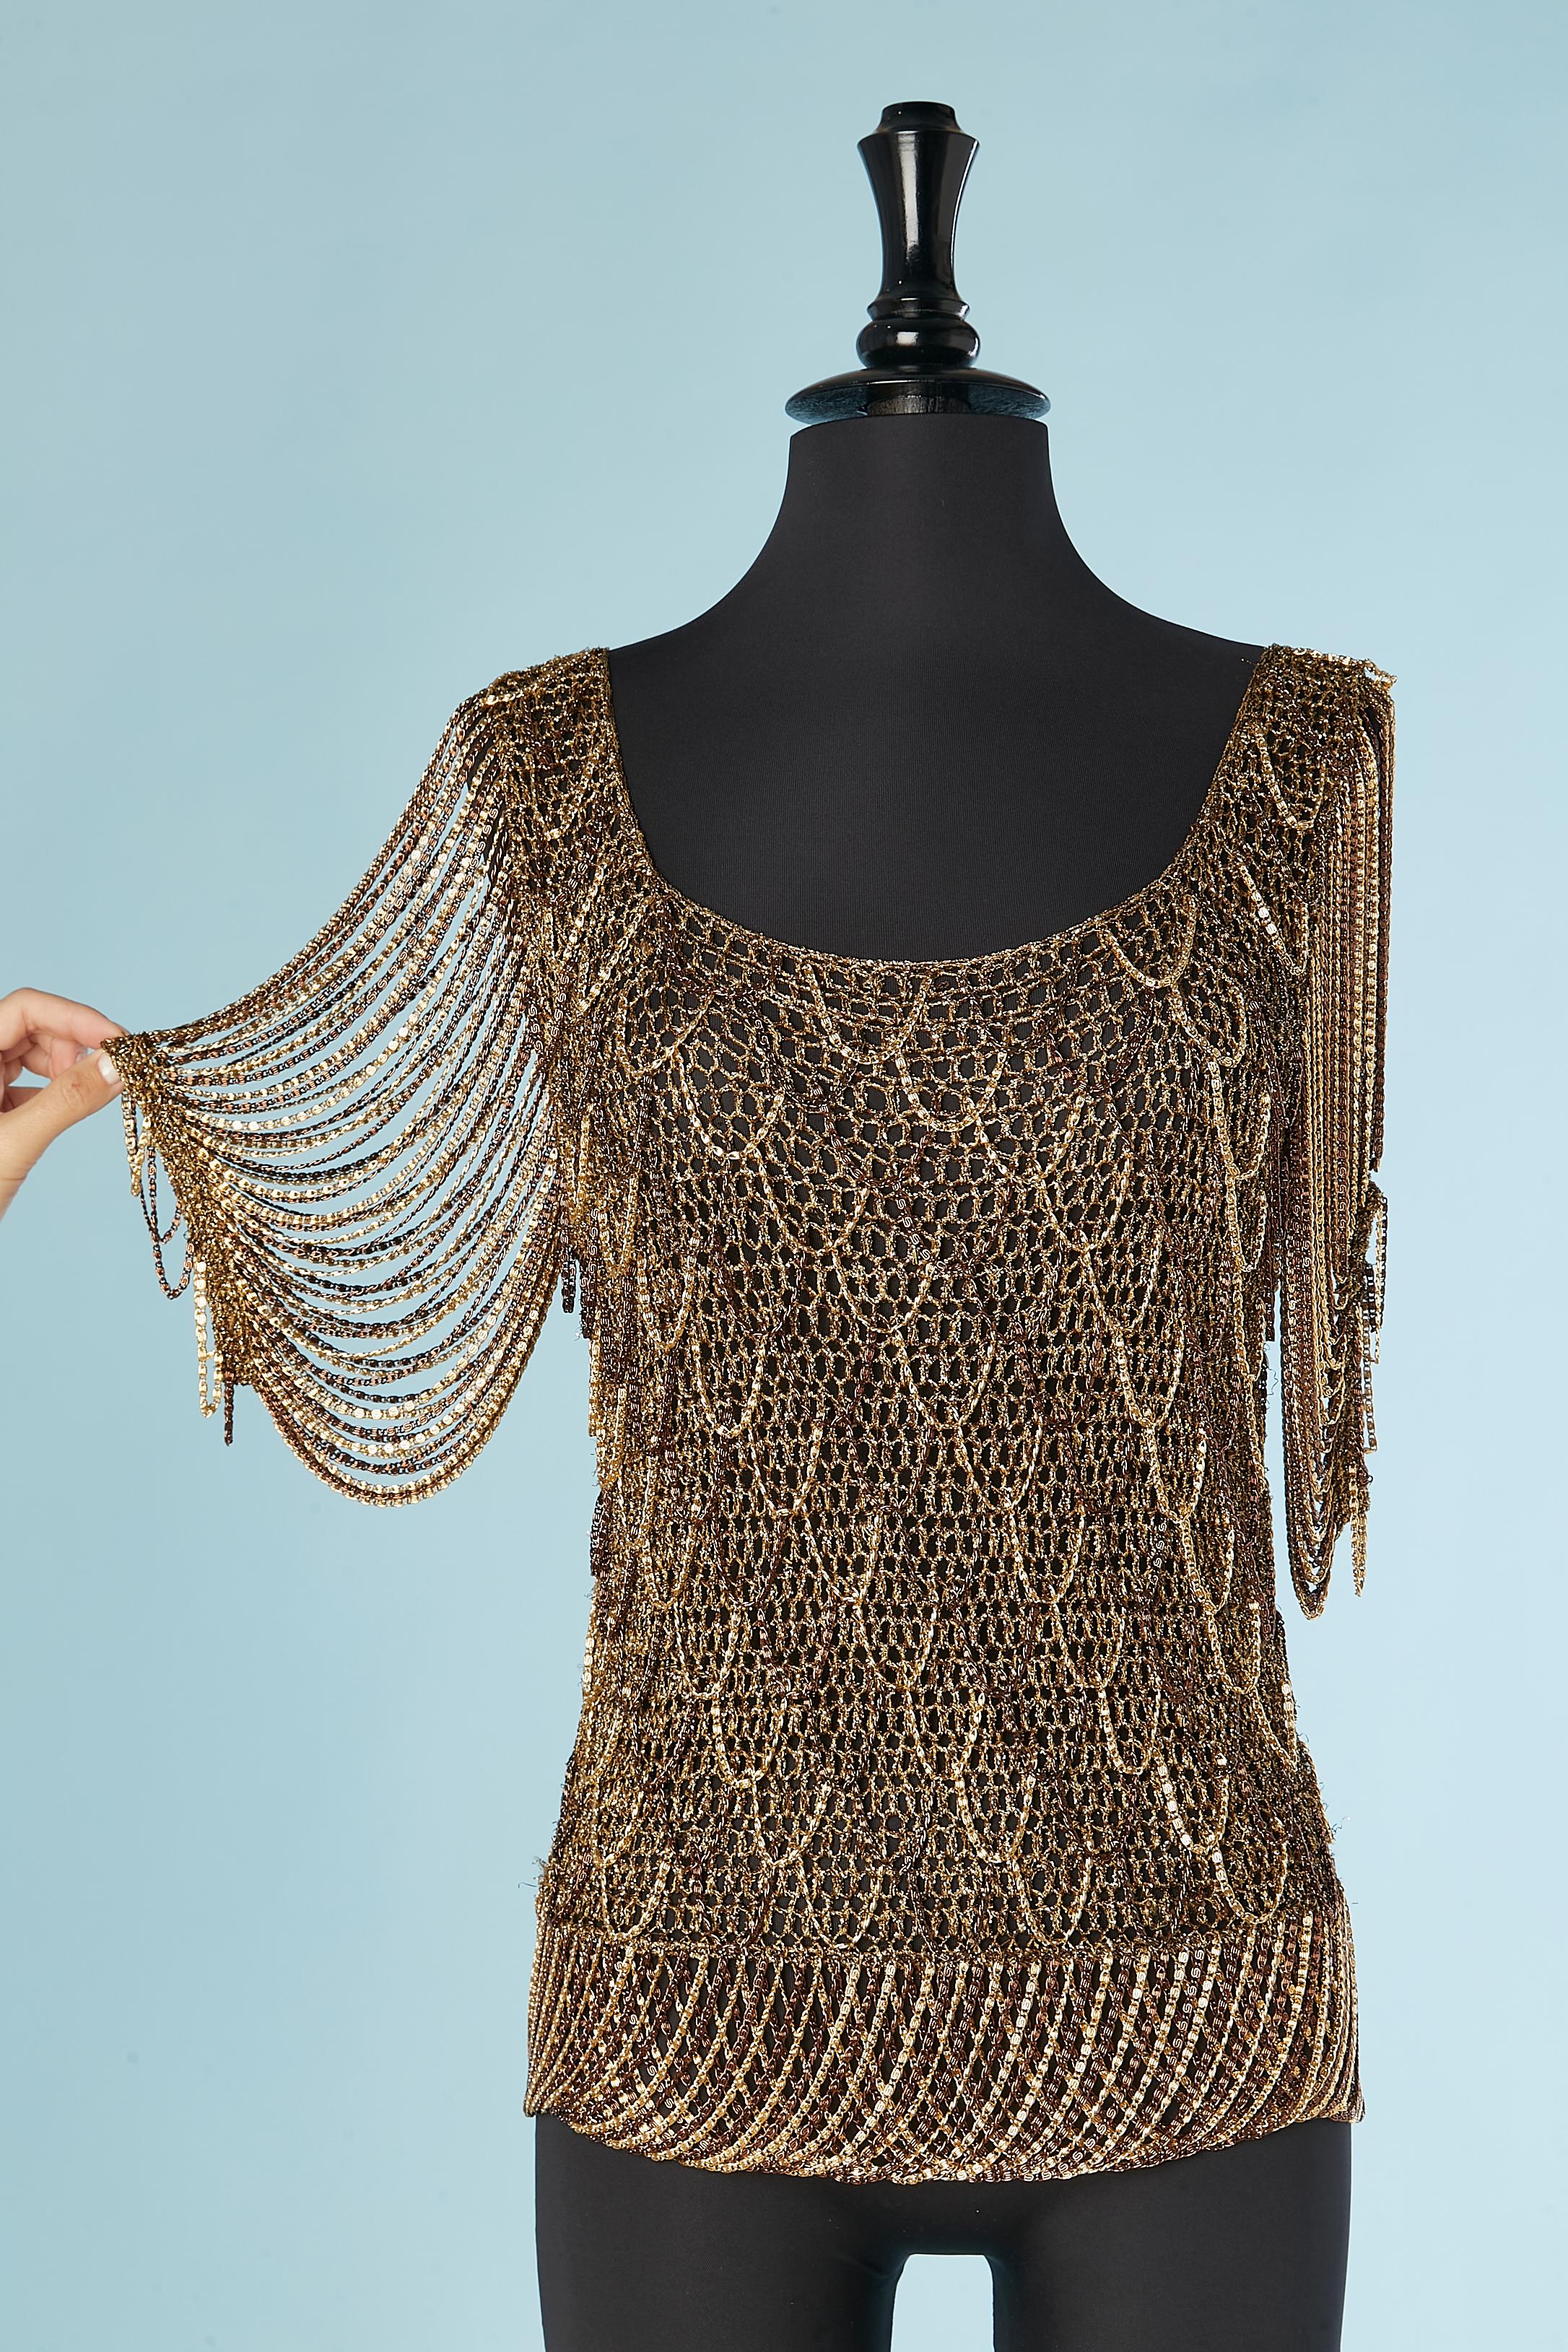 Woven gold and copper tone chain and knit sweater. The top slips overhead and is unlined. 
SIZE M 